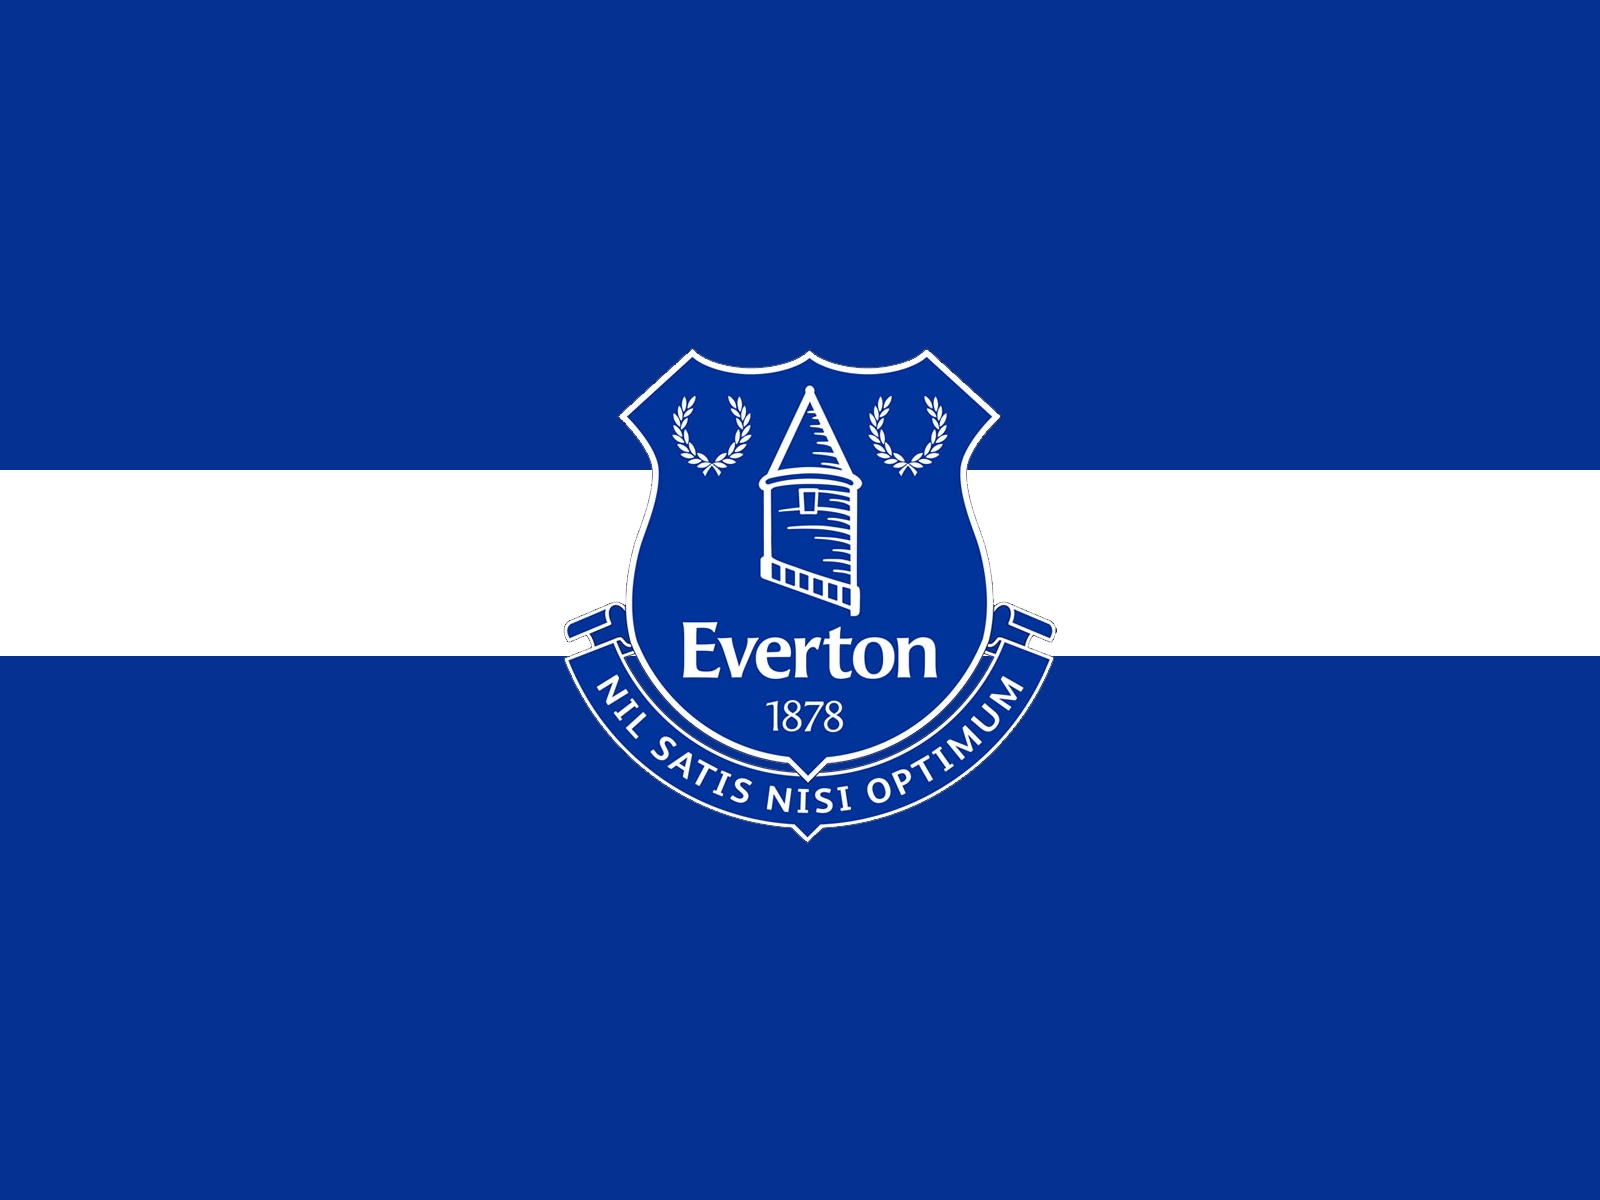 Free download Unique Everton Logo Wallpaper Great Foofball Club [1600x1200] for your Desktop, Mobile & Tablet. Explore Everton Wallpaper. Everton Wallpaper, Everton F.C. Wallpaper